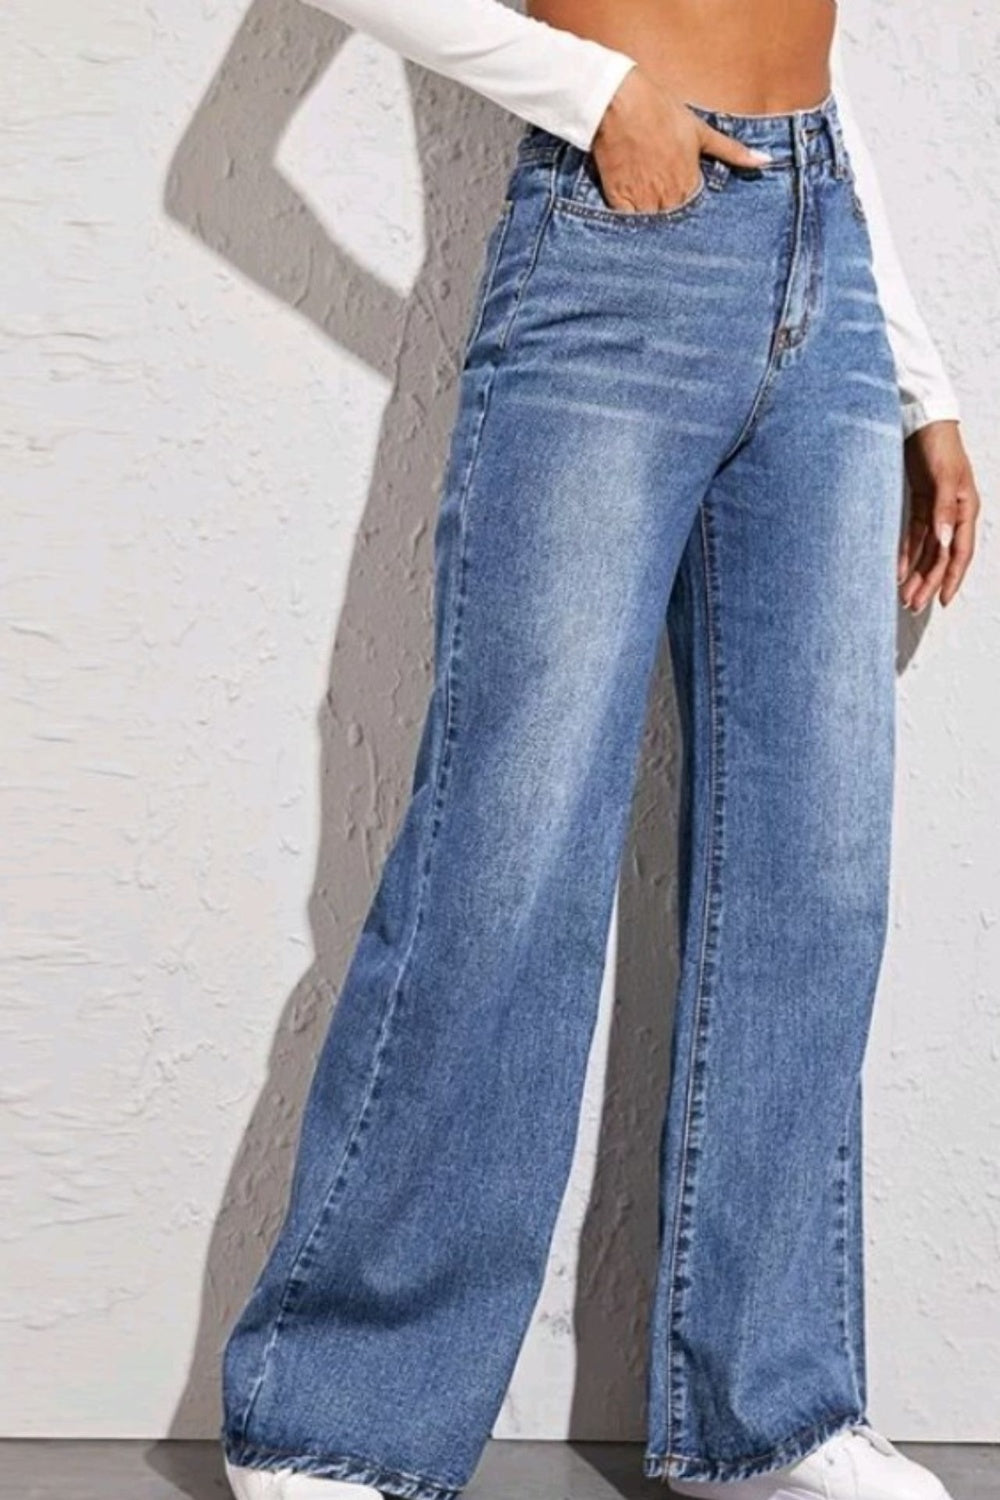 High Waist Wide Leg Jeans - Jeans - Wild Willows Boutique - Massapequa, NY, affordable and fashionable clothing for women of all ages. Bottoms, tops, dresses, intimates, outerwear, sweater, shoes, accessories, jewelry, active wear, and more // Wild Willow Boutique.